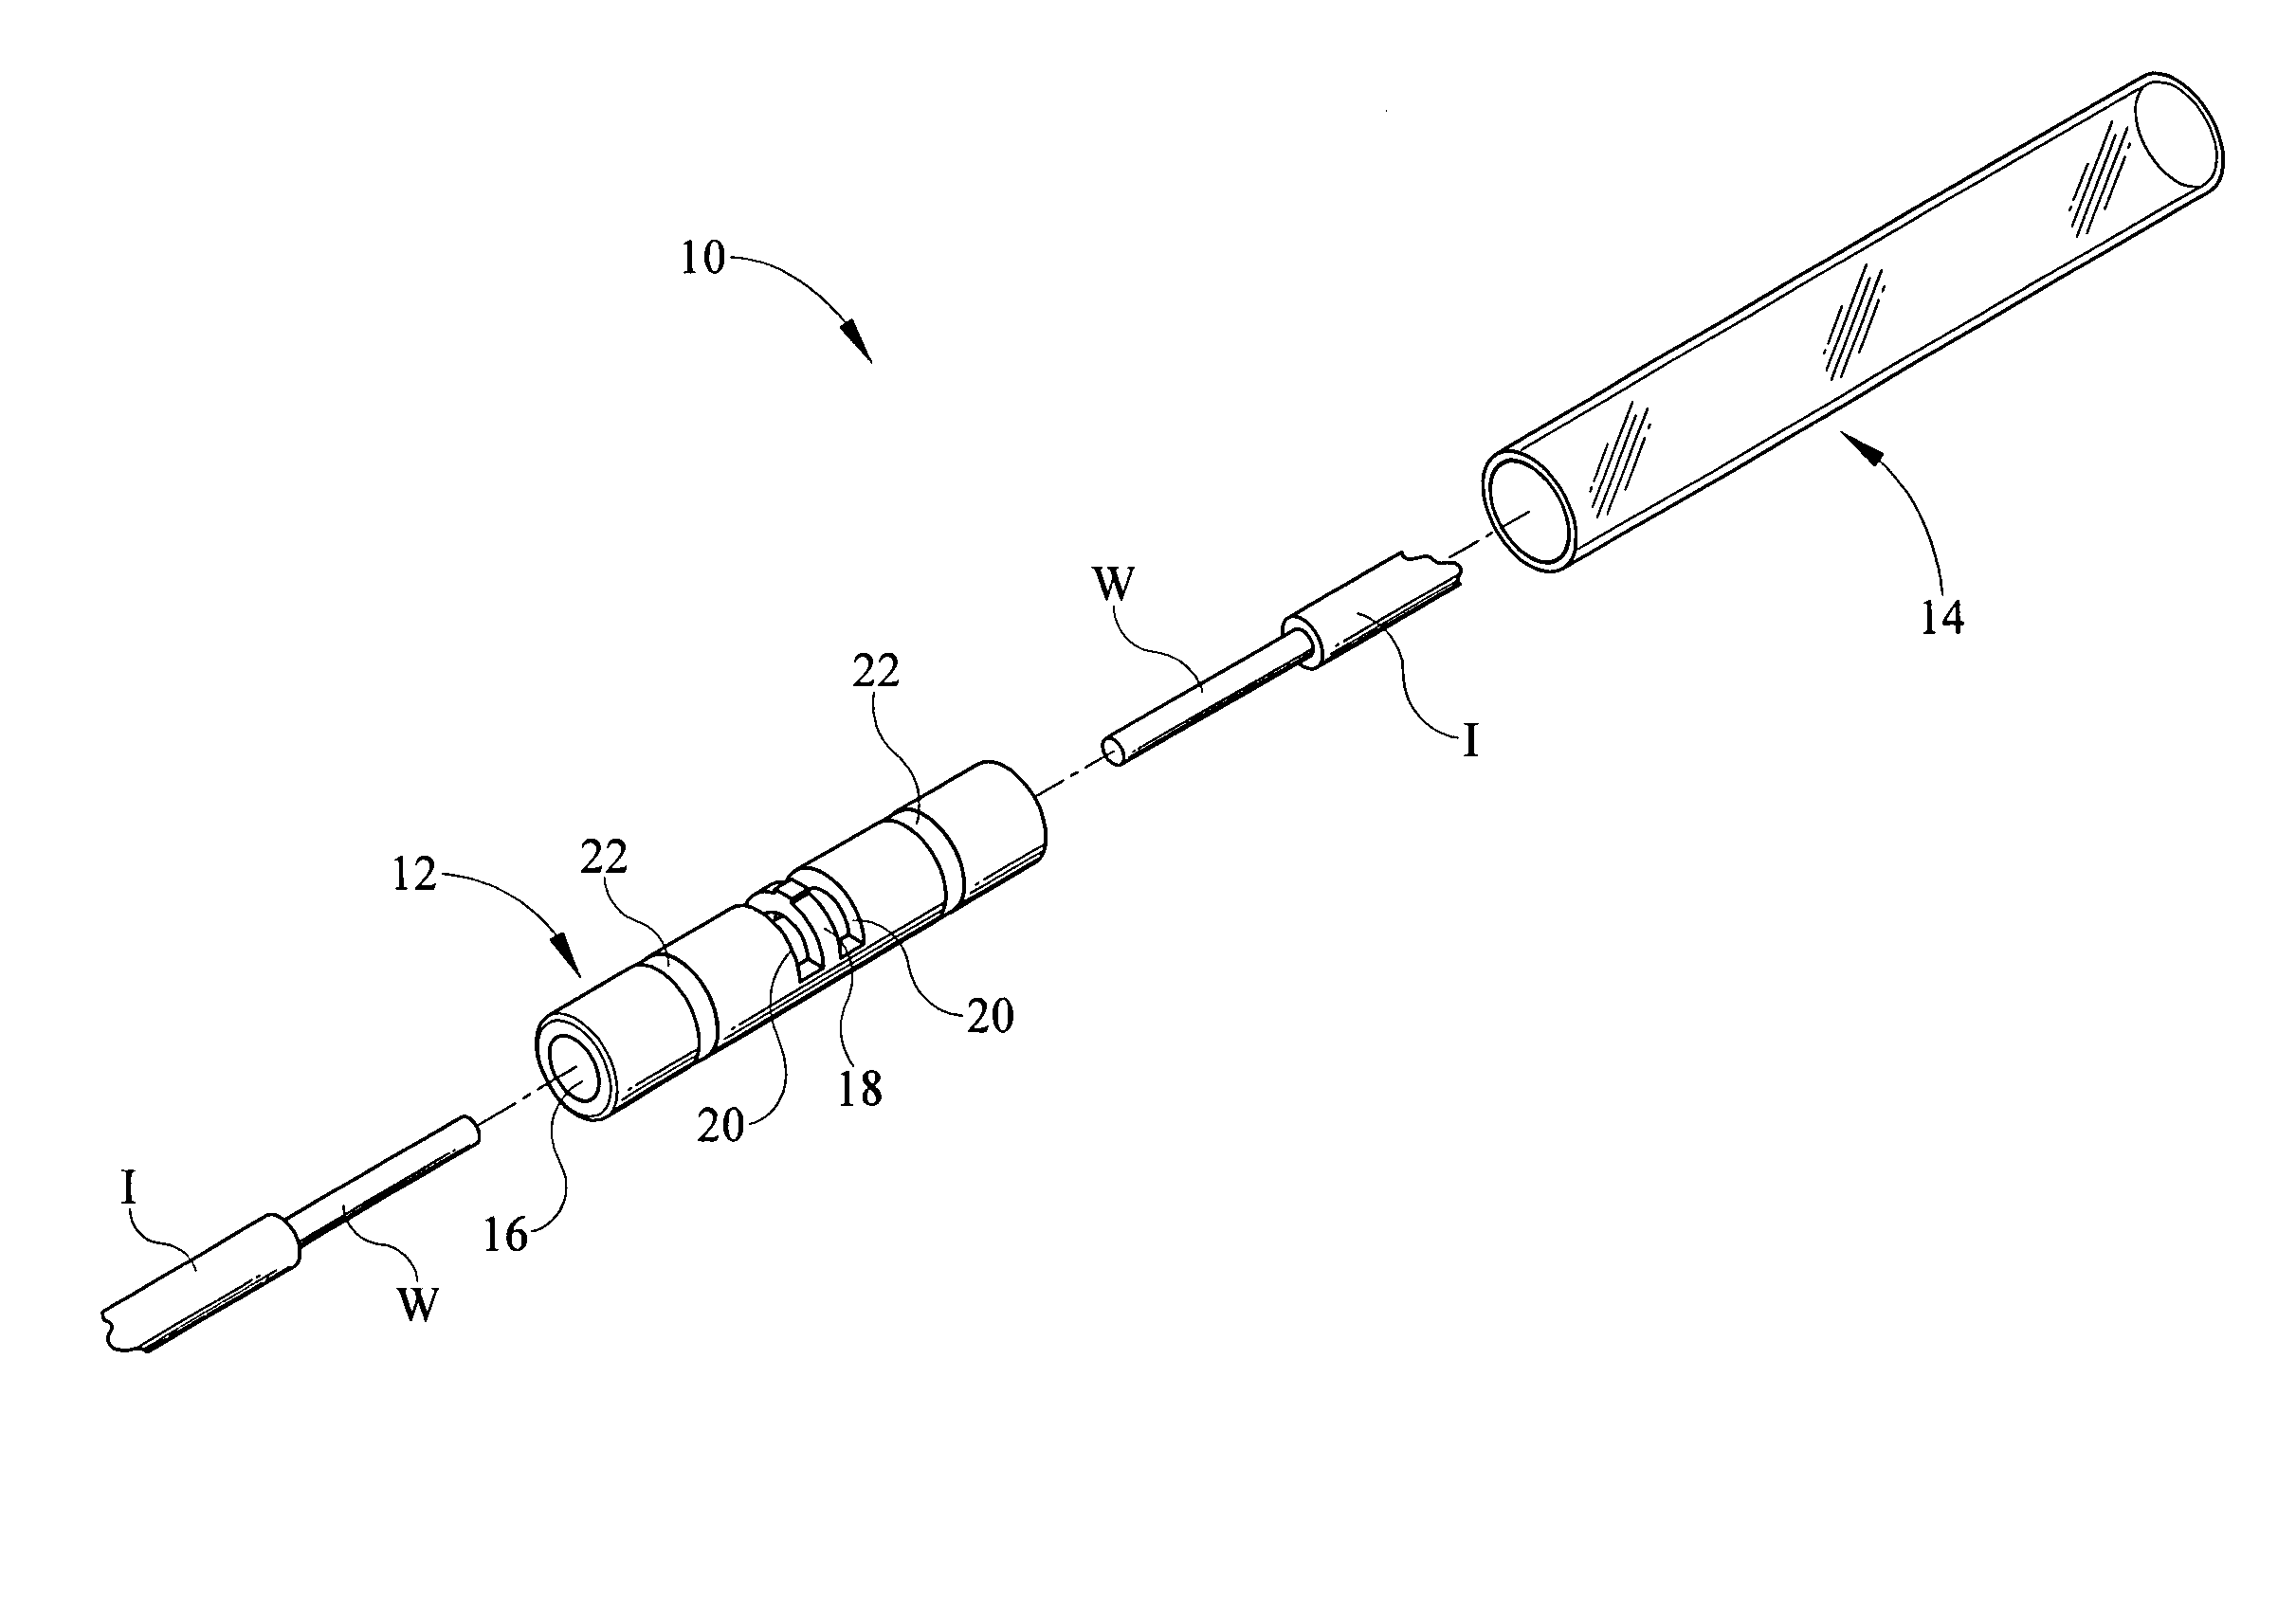 Crimpable insulated electrical connector